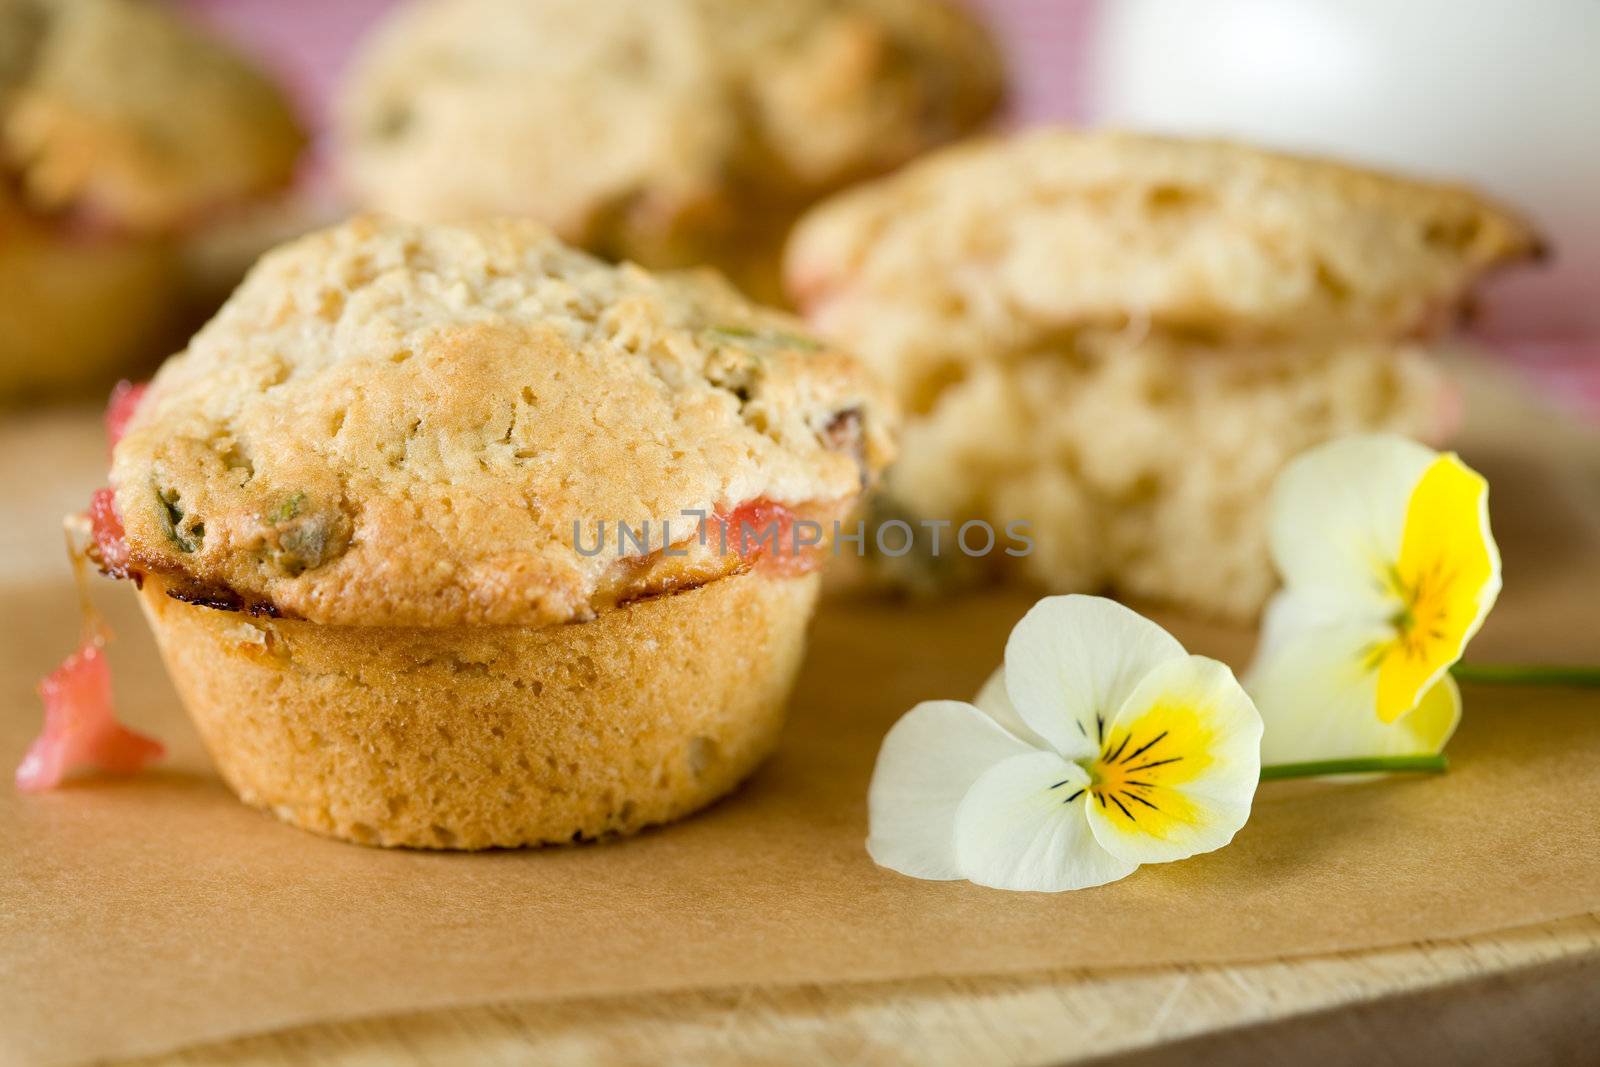 Rhubarb and pistachio muffin by Fotosmurf